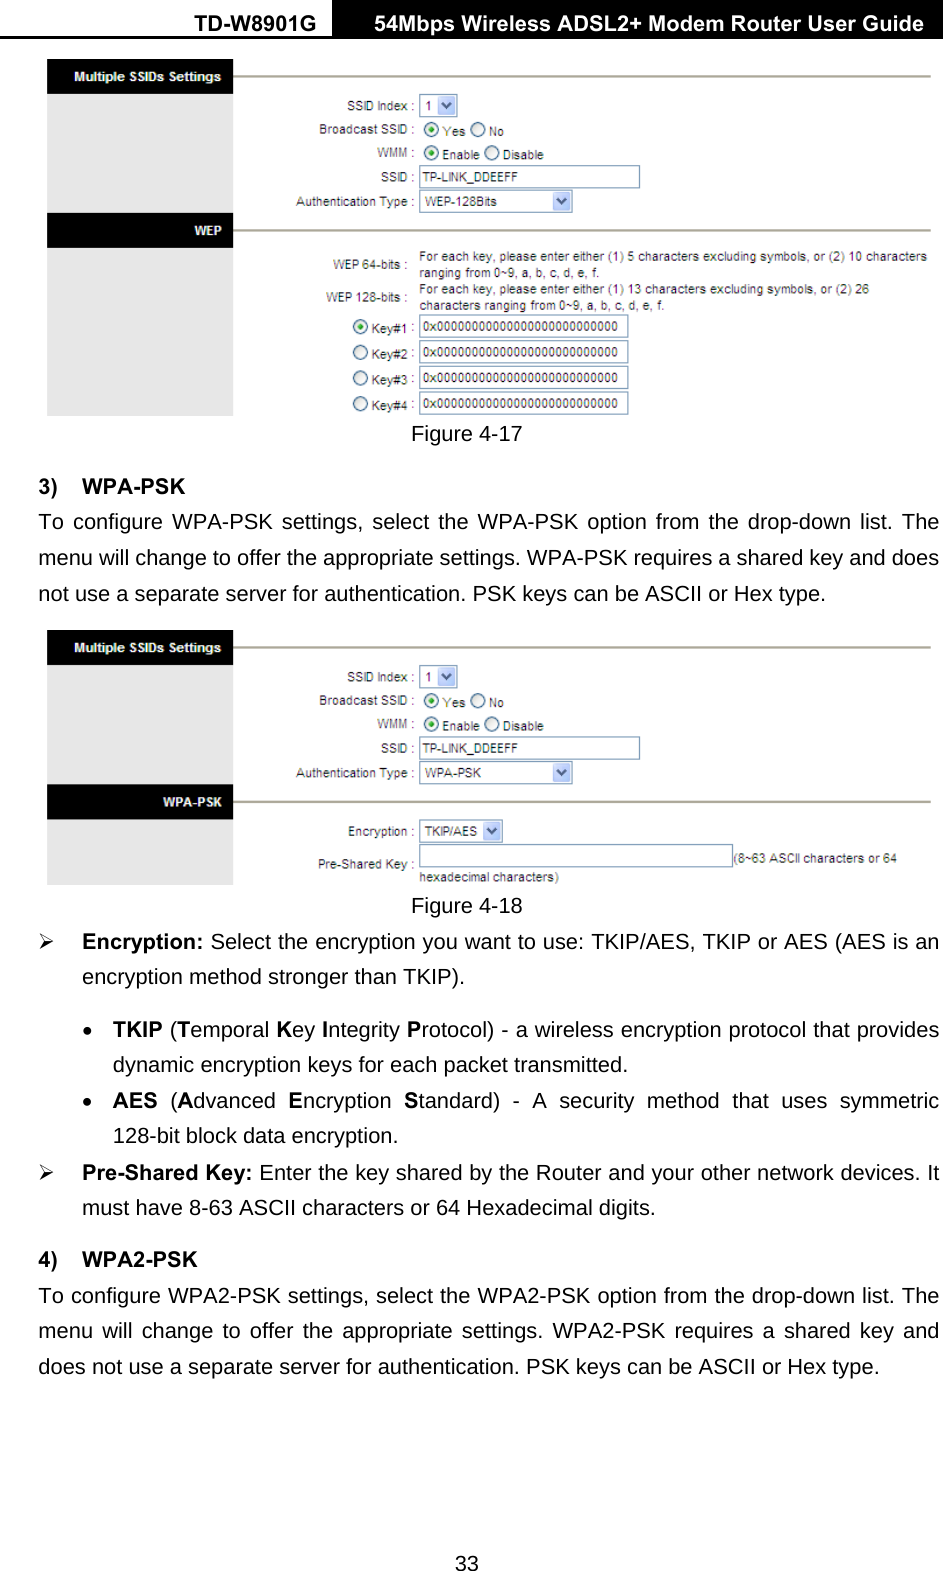 TD-W8901G   54Mbps Wireless ADSL2+ Modem Router User Guide 33  Figure 4-17 3) WPA-PSK To configure WPA-PSK settings, select the WPA-PSK option from the drop-down list. The menu will change to offer the appropriate settings. WPA-PSK requires a shared key and does not use a separate server for authentication. PSK keys can be ASCII or Hex type.  Figure 4-18 ¾ Encryption: Select the encryption you want to use: TKIP/AES, TKIP or AES (AES is an encryption method stronger than TKIP). • TKIP (Temporal Key Integrity Protocol) - a wireless encryption protocol that provides dynamic encryption keys for each packet transmitted. • AES (Advanced  Encryption  Standard) - A security method that uses symmetric 128-bit block data encryption. ¾ Pre-Shared Key: Enter the key shared by the Router and your other network devices. It must have 8-63 ASCII characters or 64 Hexadecimal digits. 4) WPA2-PSK To configure WPA2-PSK settings, select the WPA2-PSK option from the drop-down list. The menu will change to offer the appropriate settings. WPA2-PSK requires a shared key and does not use a separate server for authentication. PSK keys can be ASCII or Hex type. 